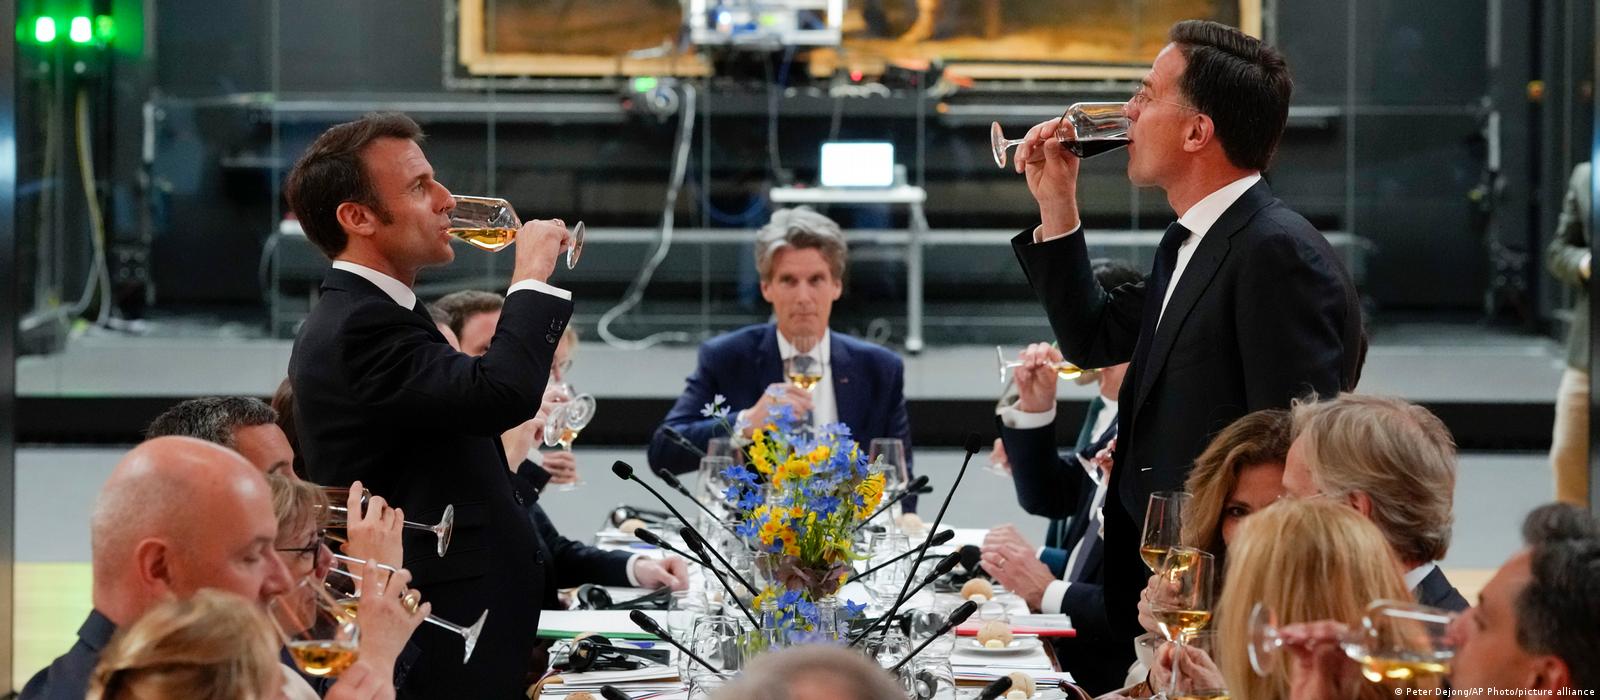 French President Emmanuel Macron, left, and Dutch Prime Minister Mark Rutte, right, propose a toast as they sit down for a working dinner in front of Rembrandt's Nightwatch at the Rijksmuseum in Amsterdam